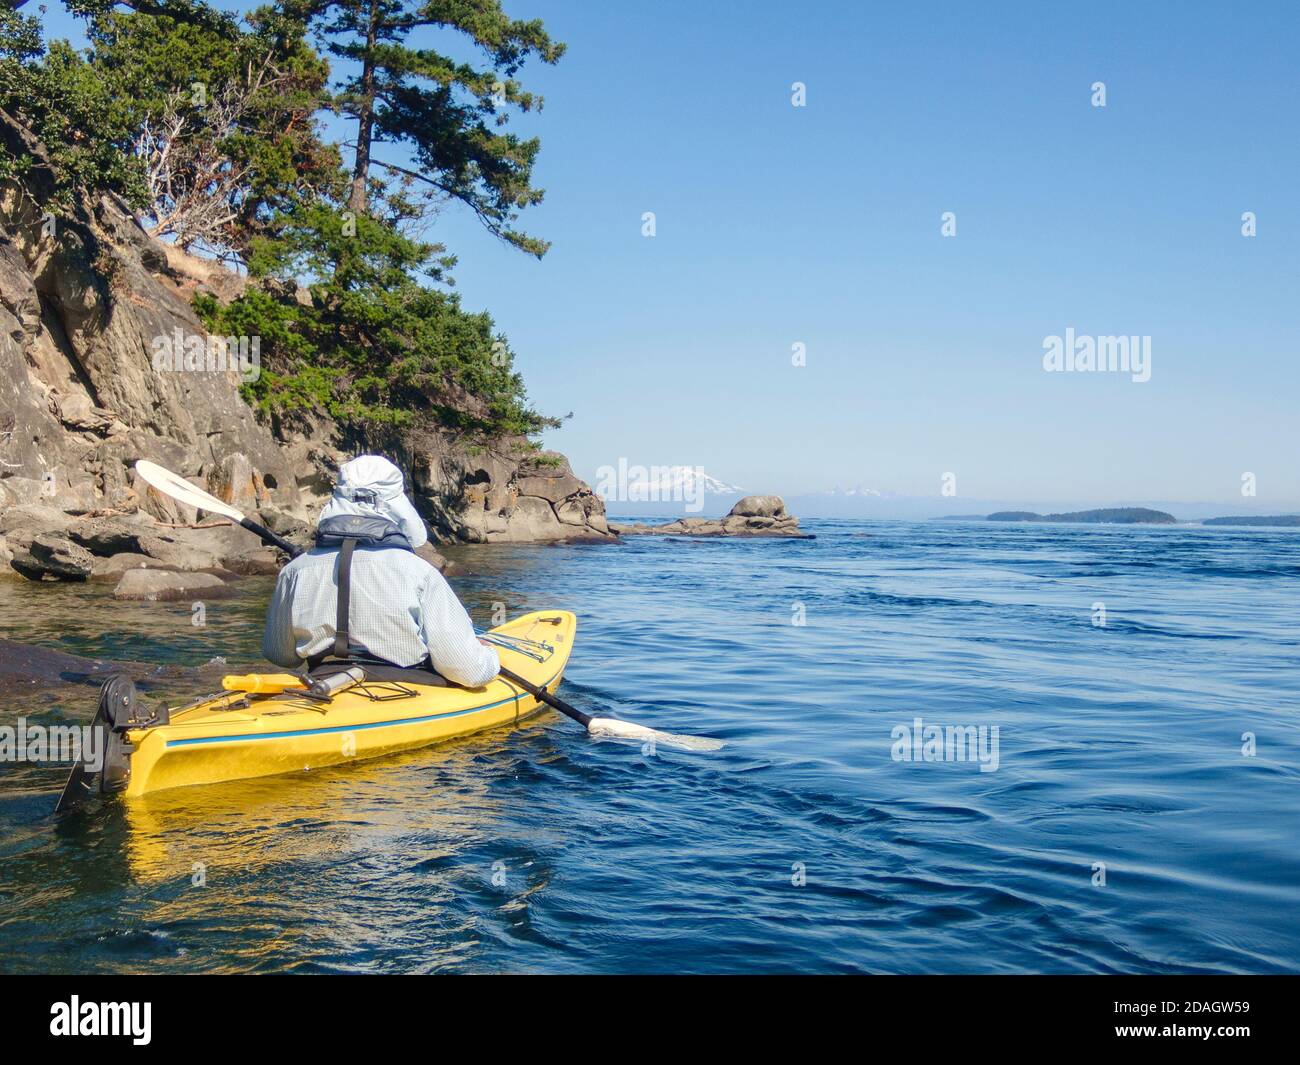 A man, dressed for protection from the summer sun, paddles a yellow kayak in BC's southern Gulf Islands, with Mt. Baker's snowy peak in the distance. Stock Photo